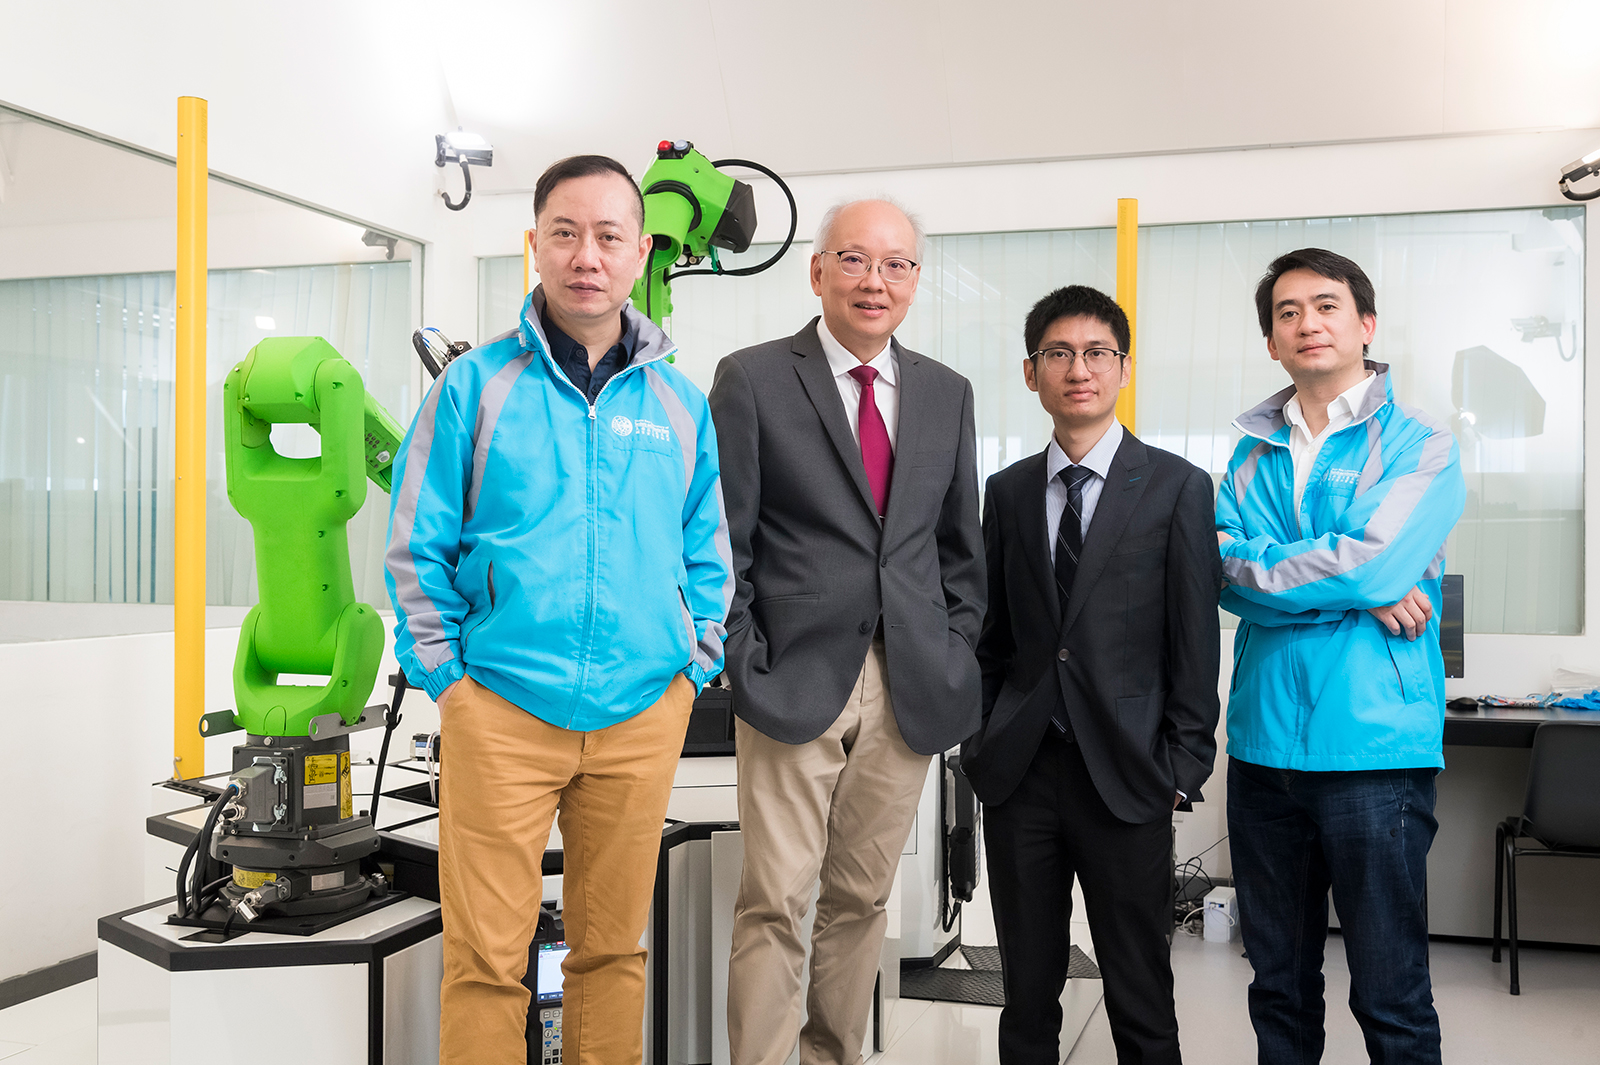 Professor Chan (second from the left) leads Dr Chan (first from the left), Professor Wu (second from the right), and Dr Shum (first from the right) in the development of the world's first universal metasurface antenna.